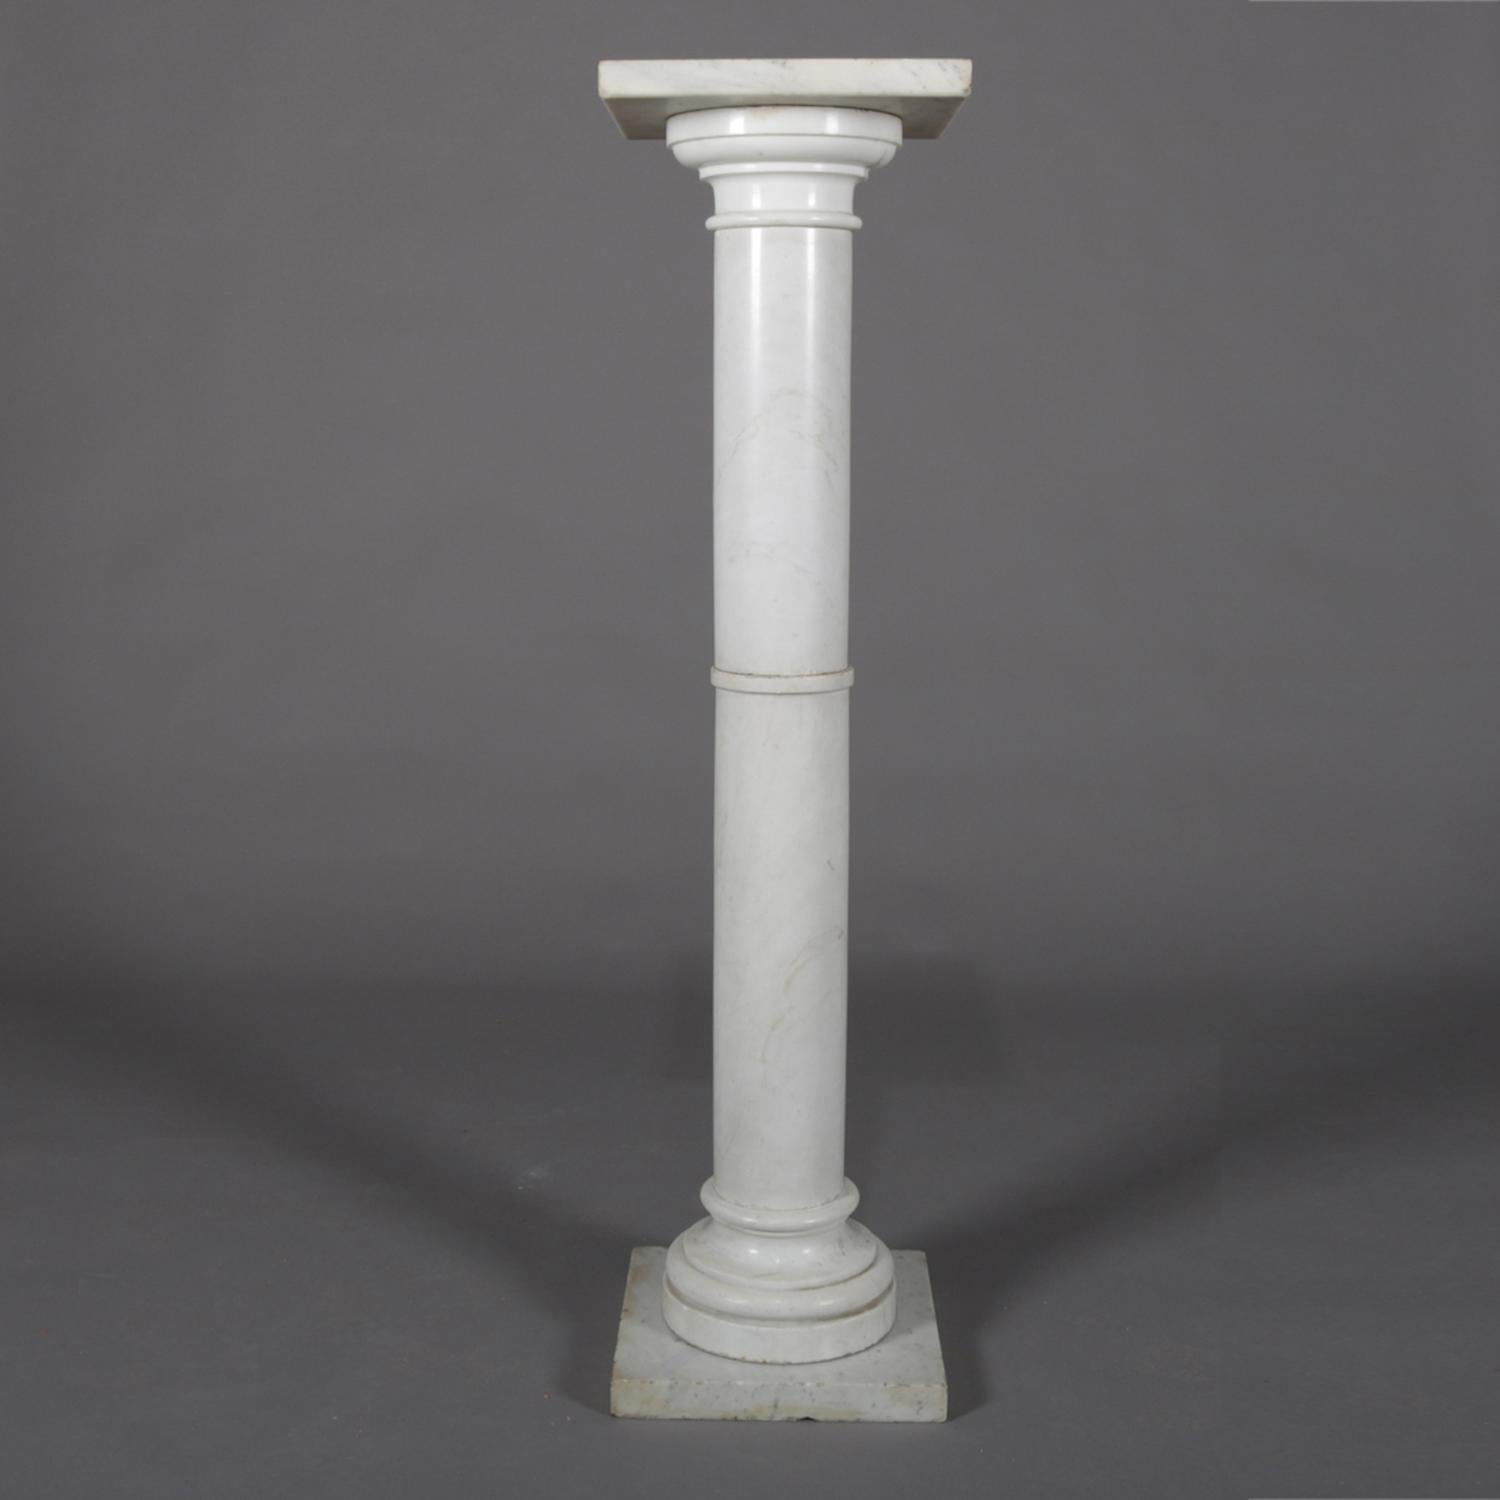 Antique carved Italian marble sculpture display pedestal features Corinthian column-form with stepped base and capital, circa 1890.

Measures: 47.5